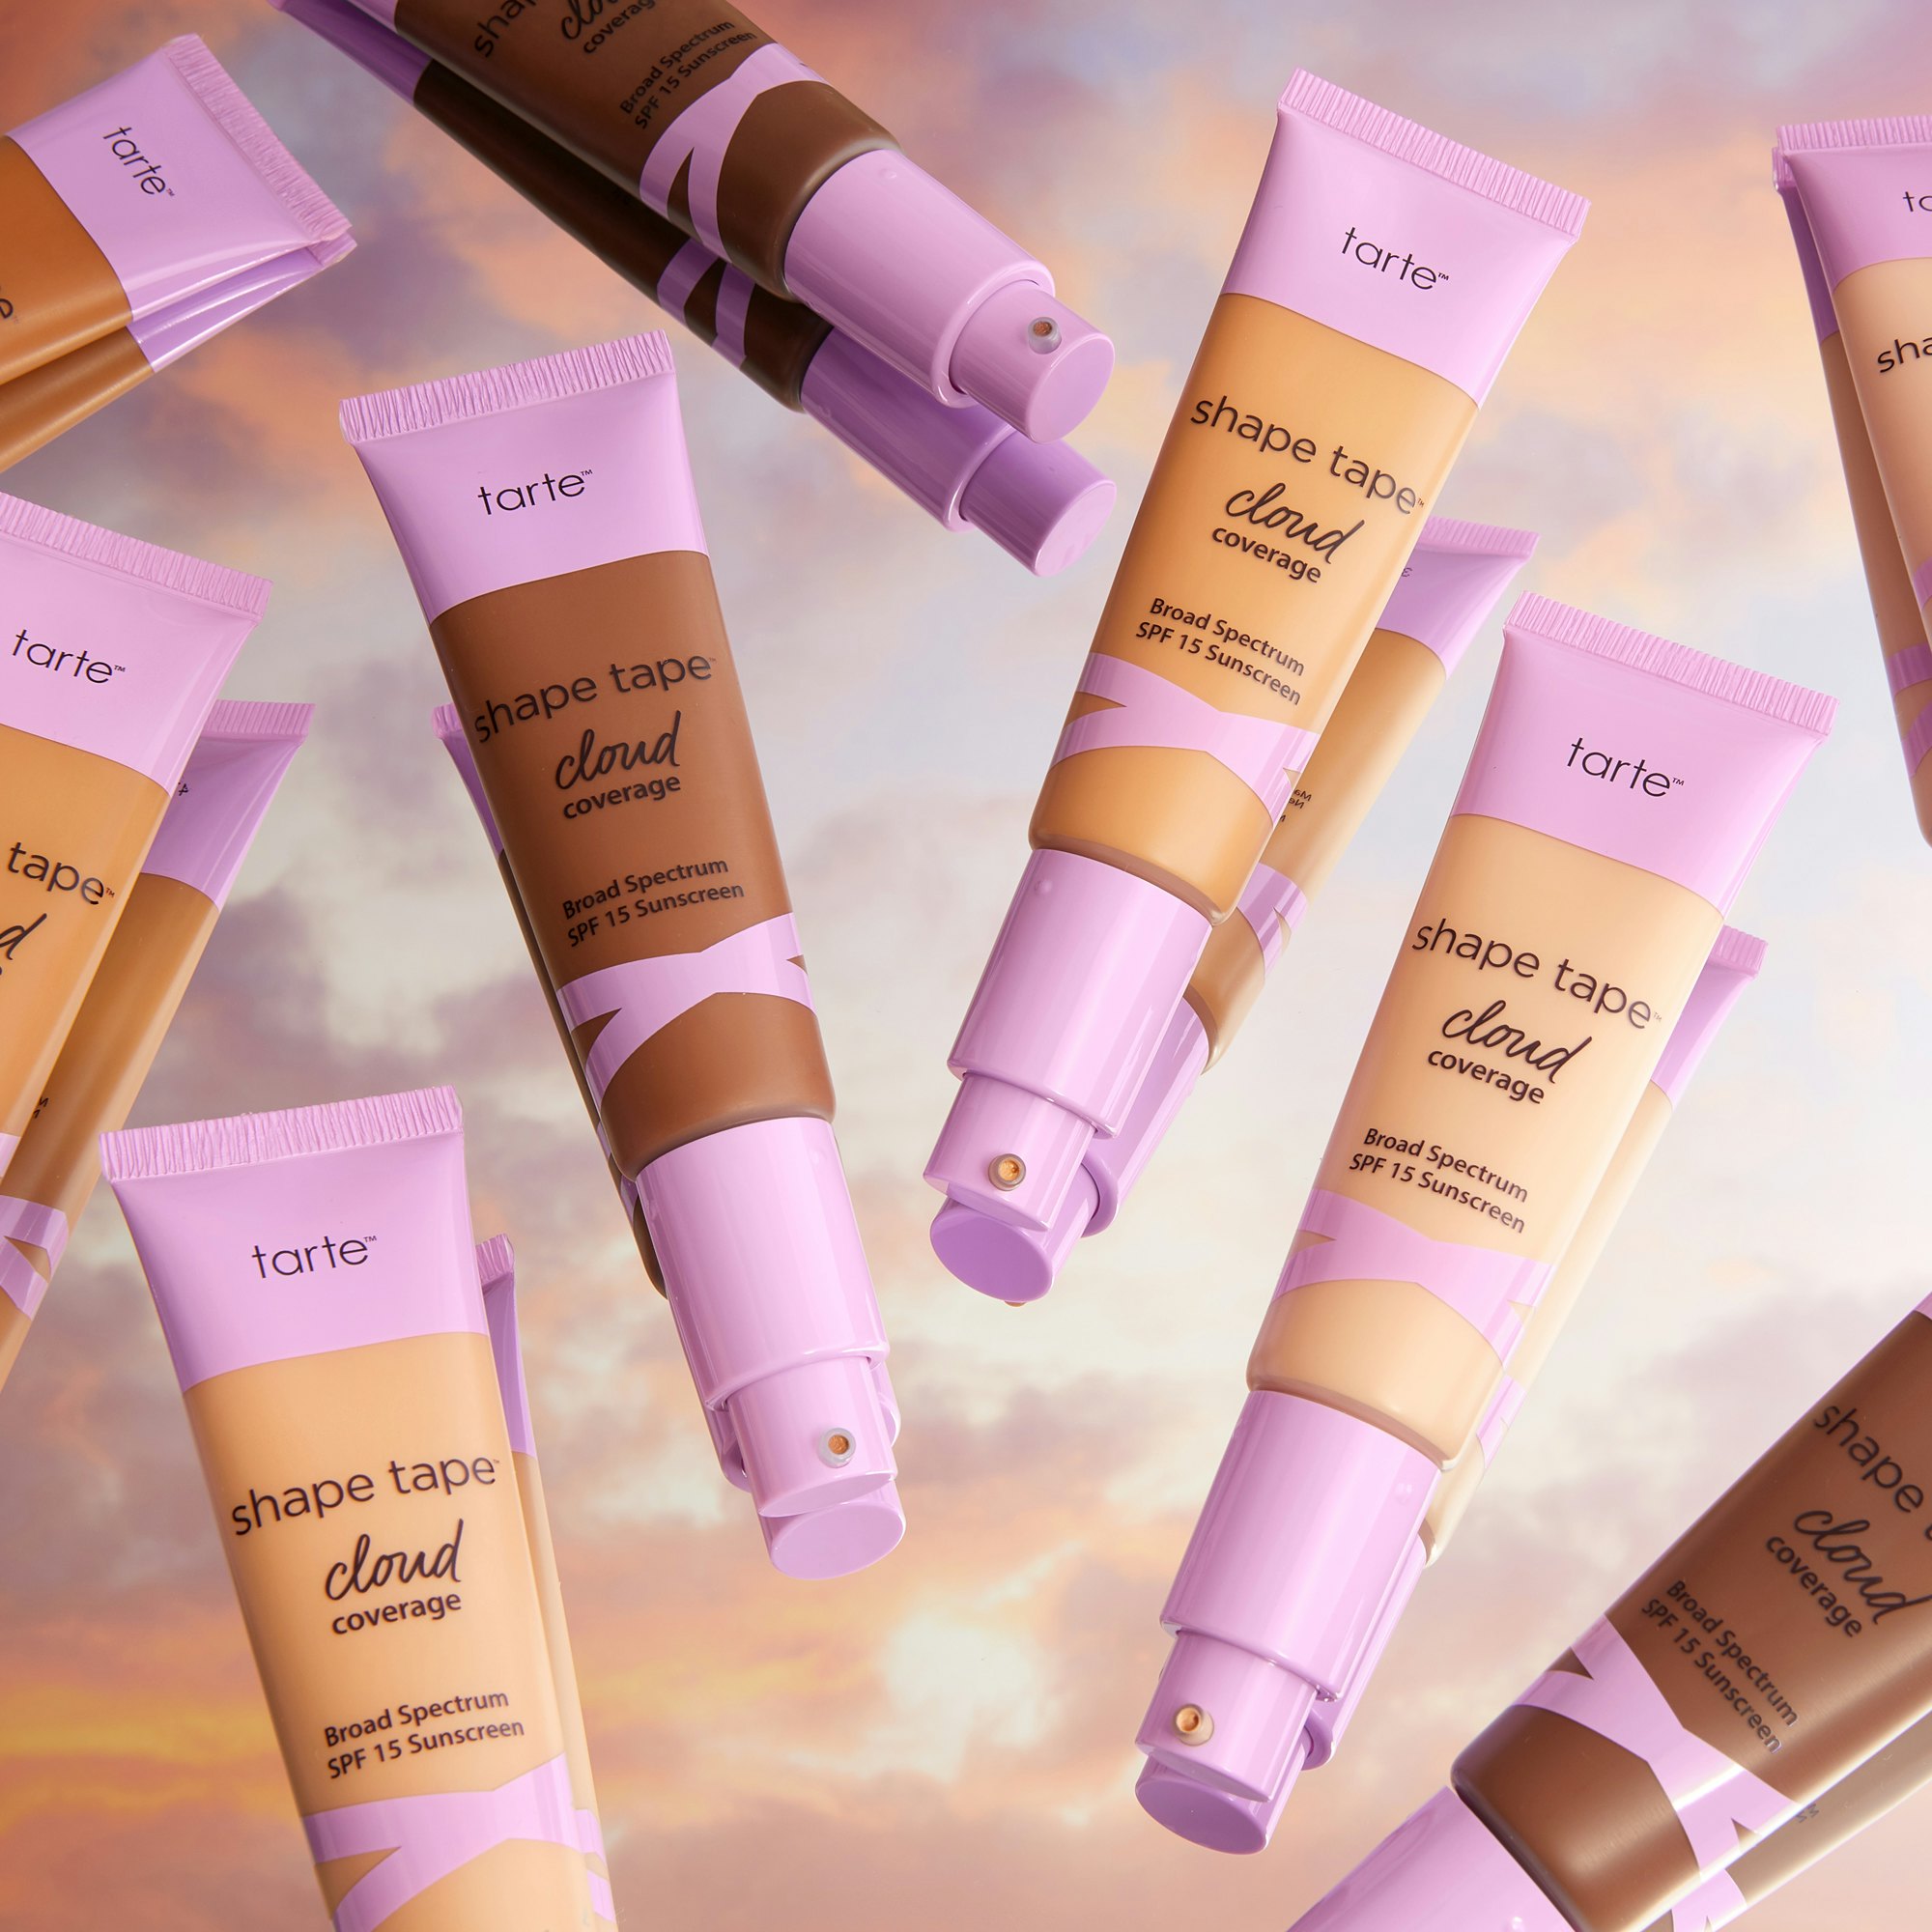 Tarte Shape Tape Cloud Coverage Review: Get Clean, Expensive